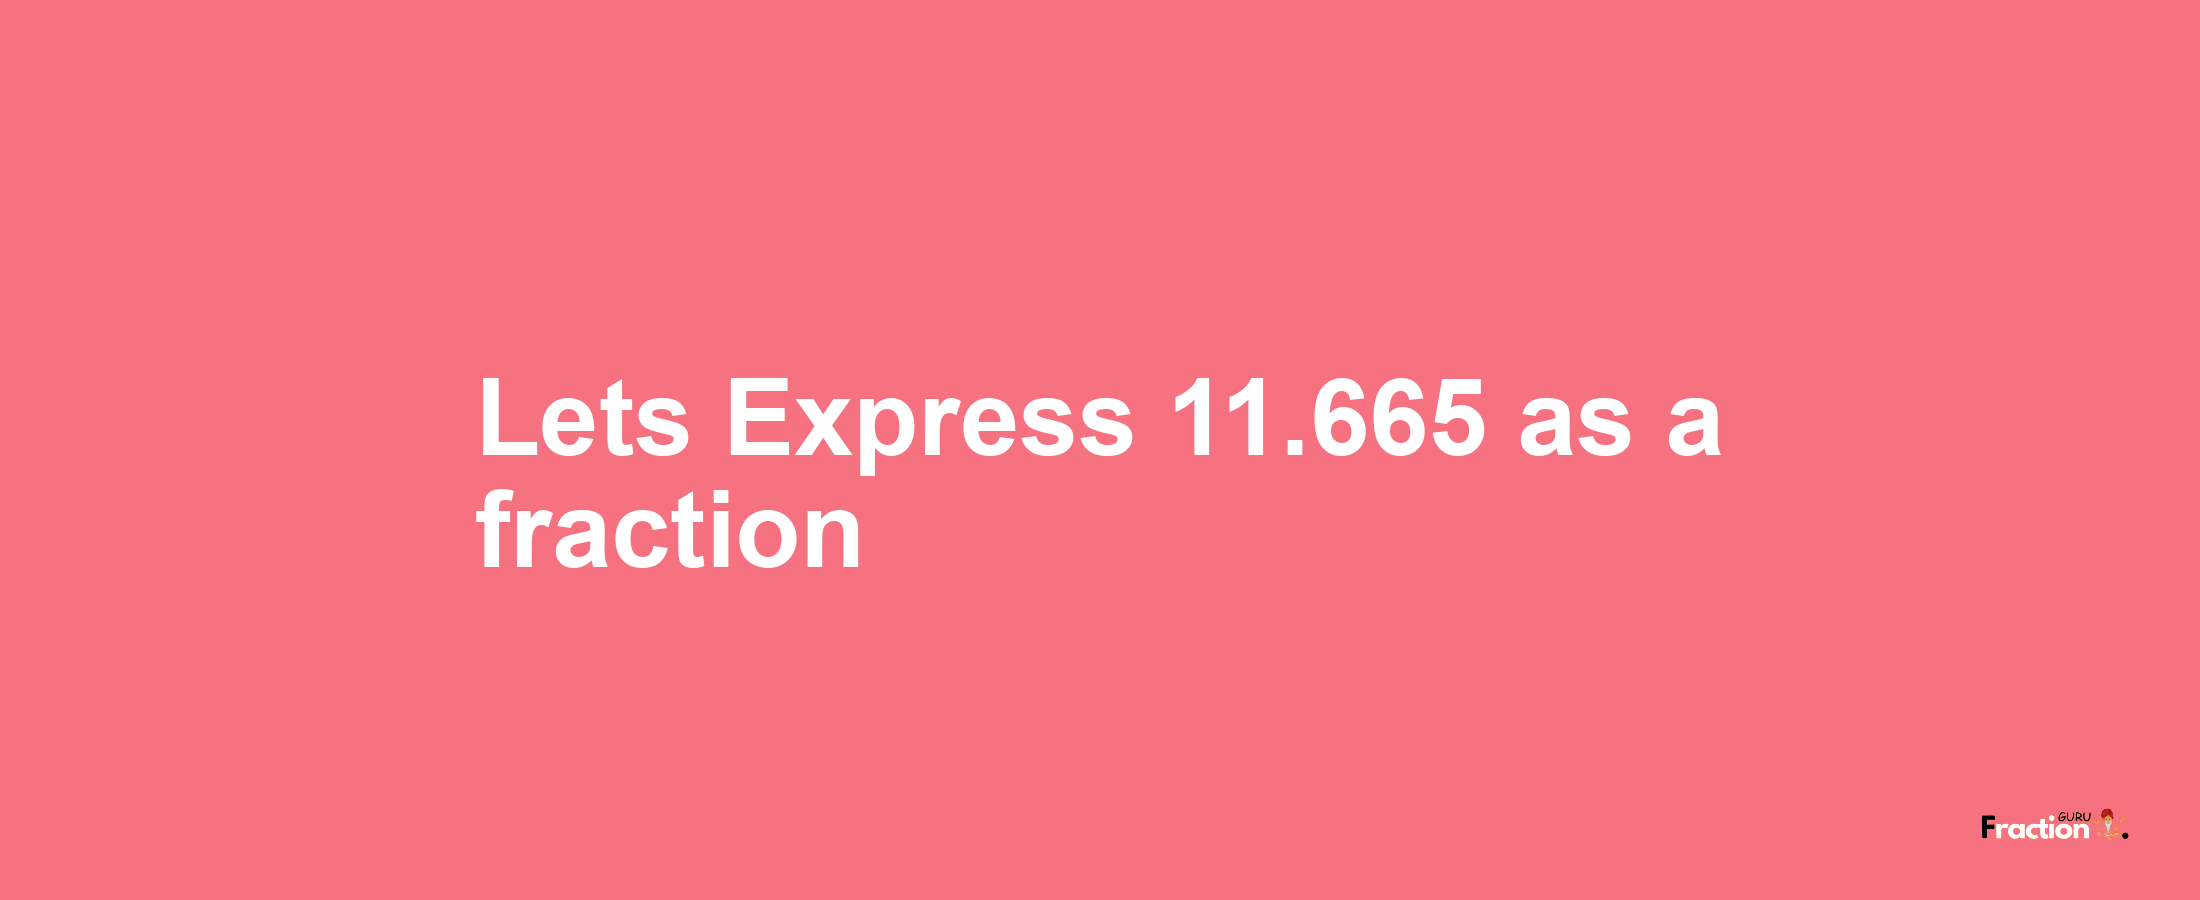 Lets Express 11.665 as afraction